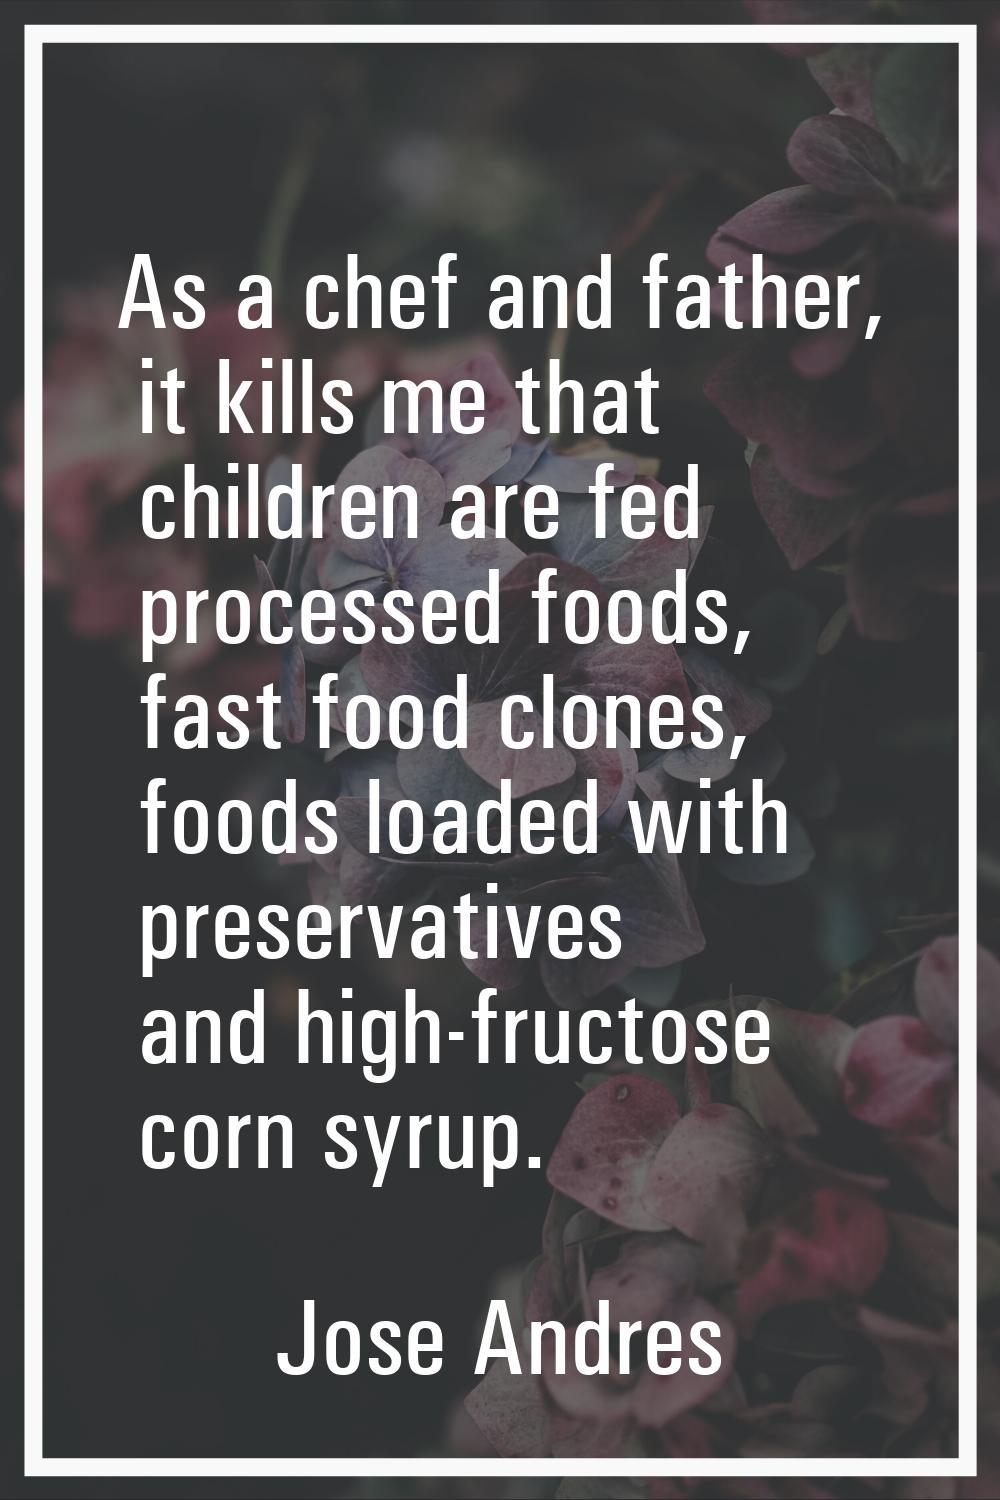 As a chef and father, it kills me that children are fed processed foods, fast food clones, foods lo